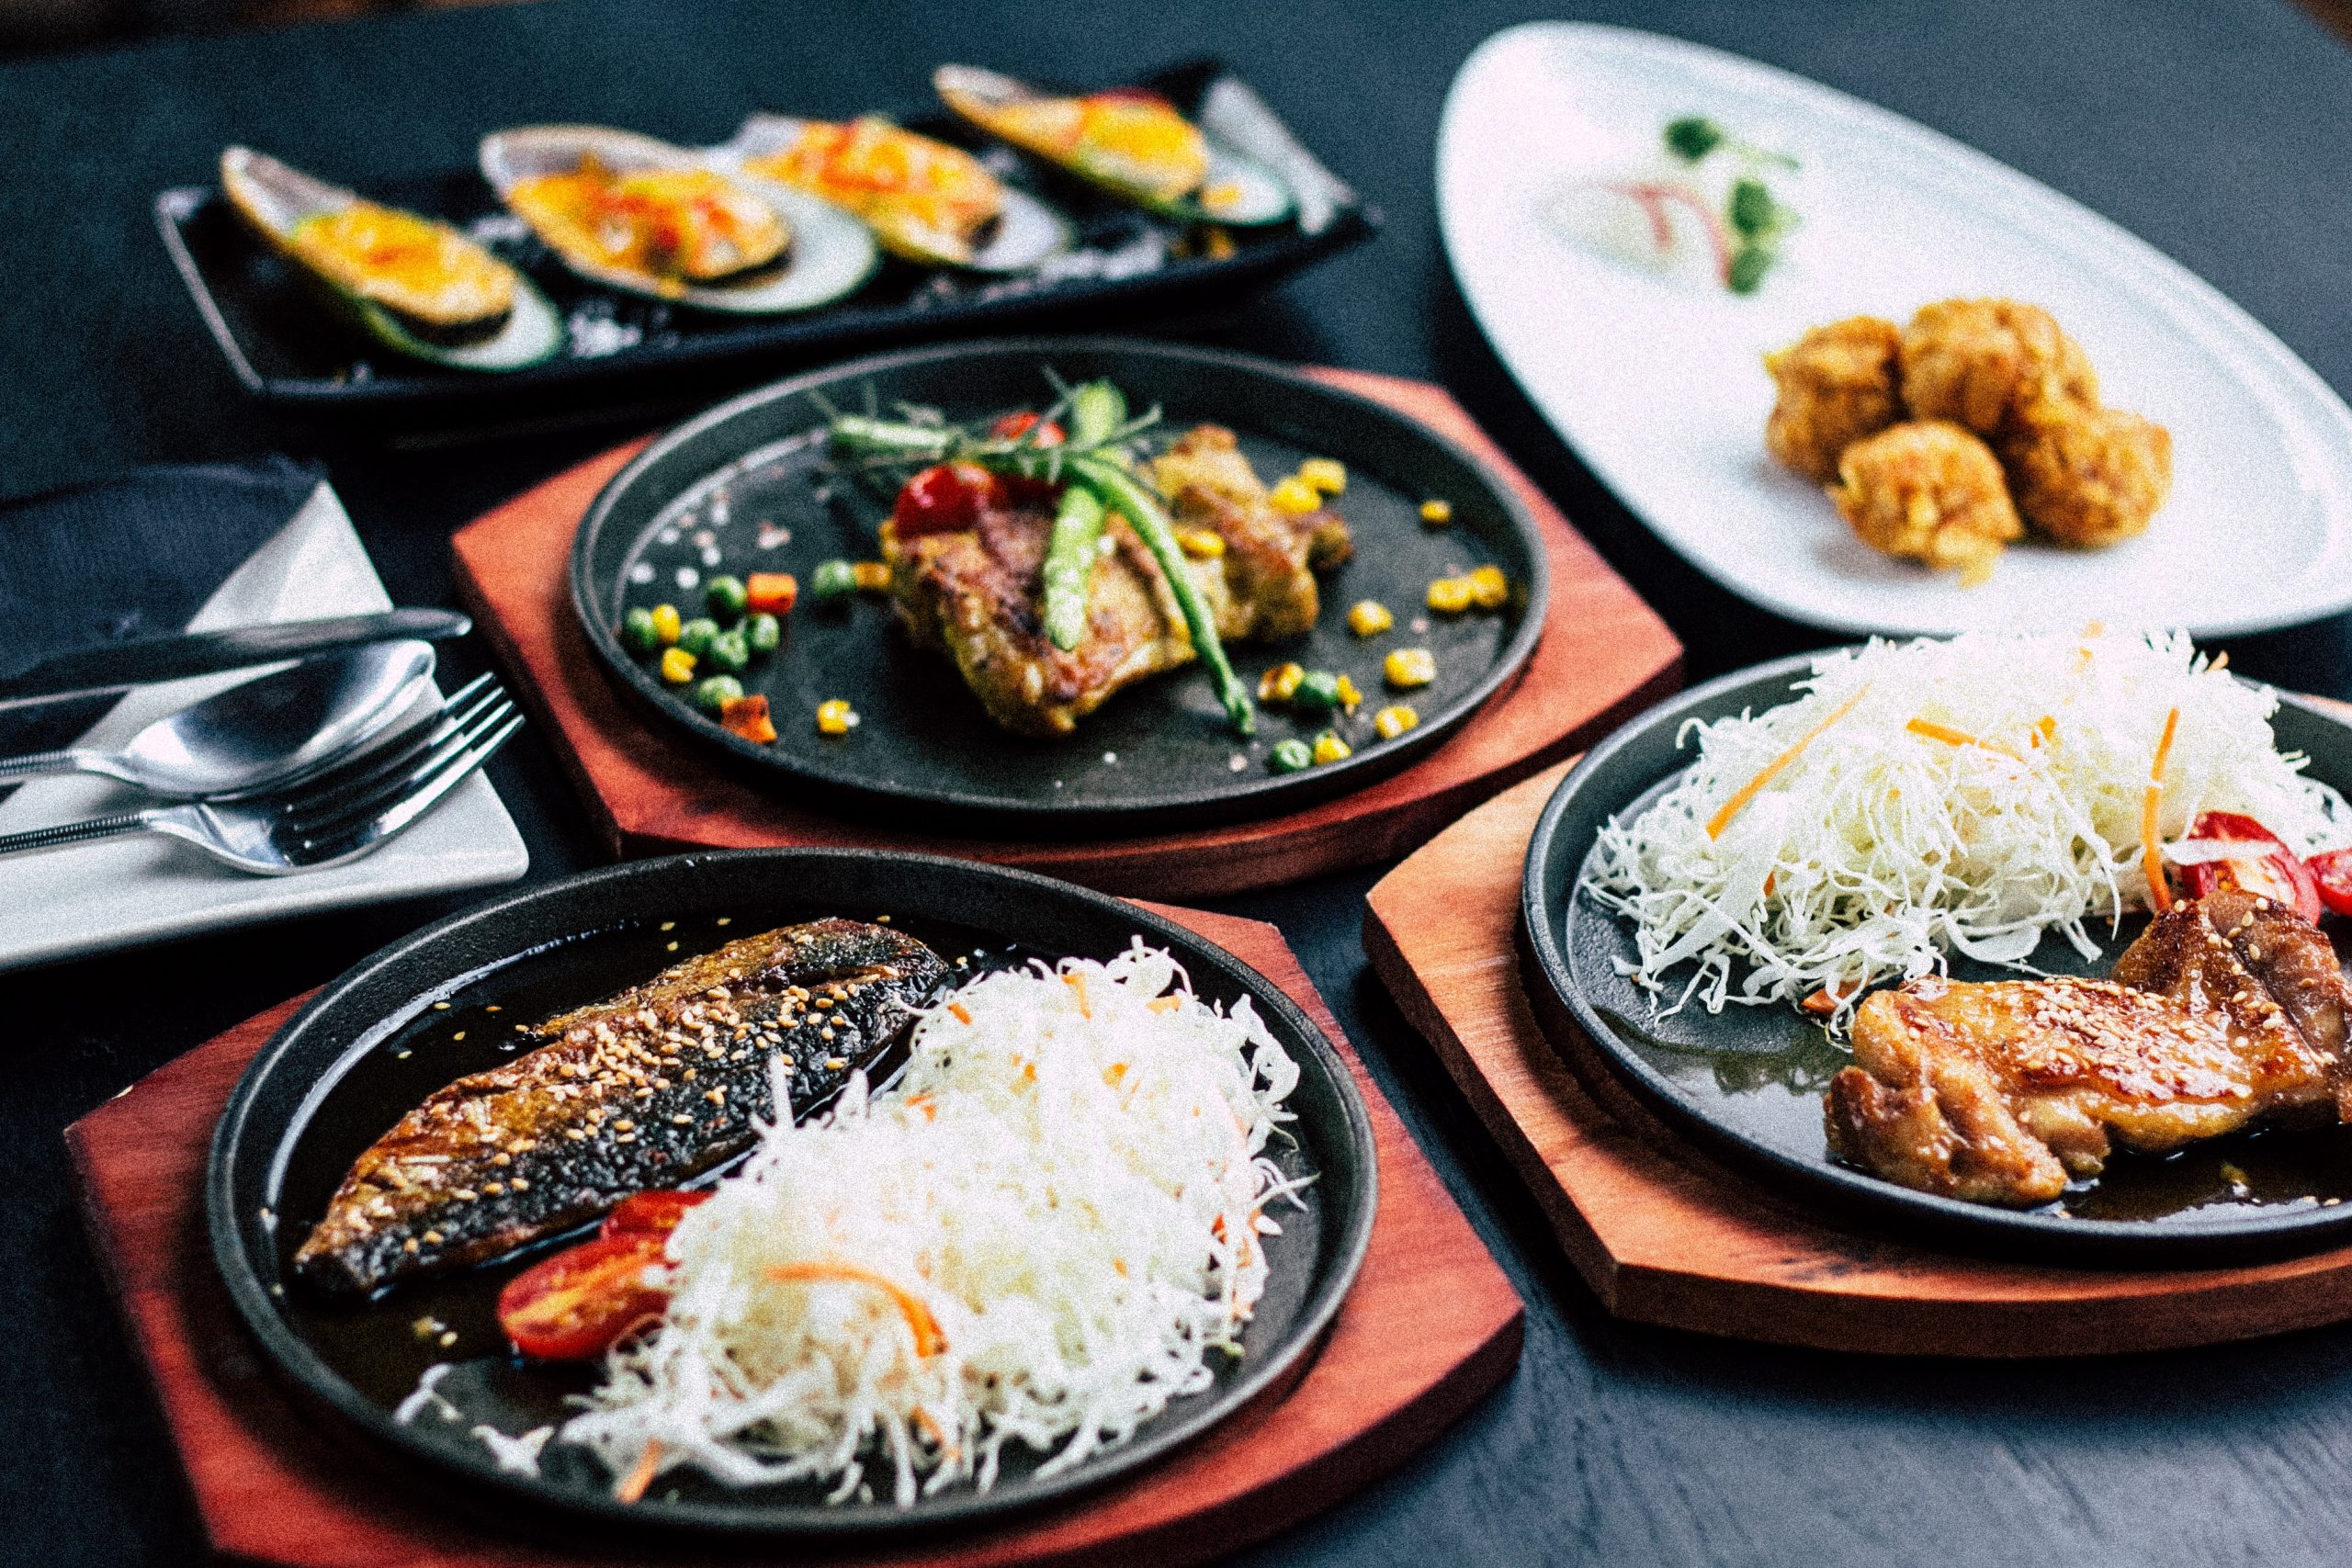 Amazing food in Singapore - 10 Reasons To Visit Singapore in 2023